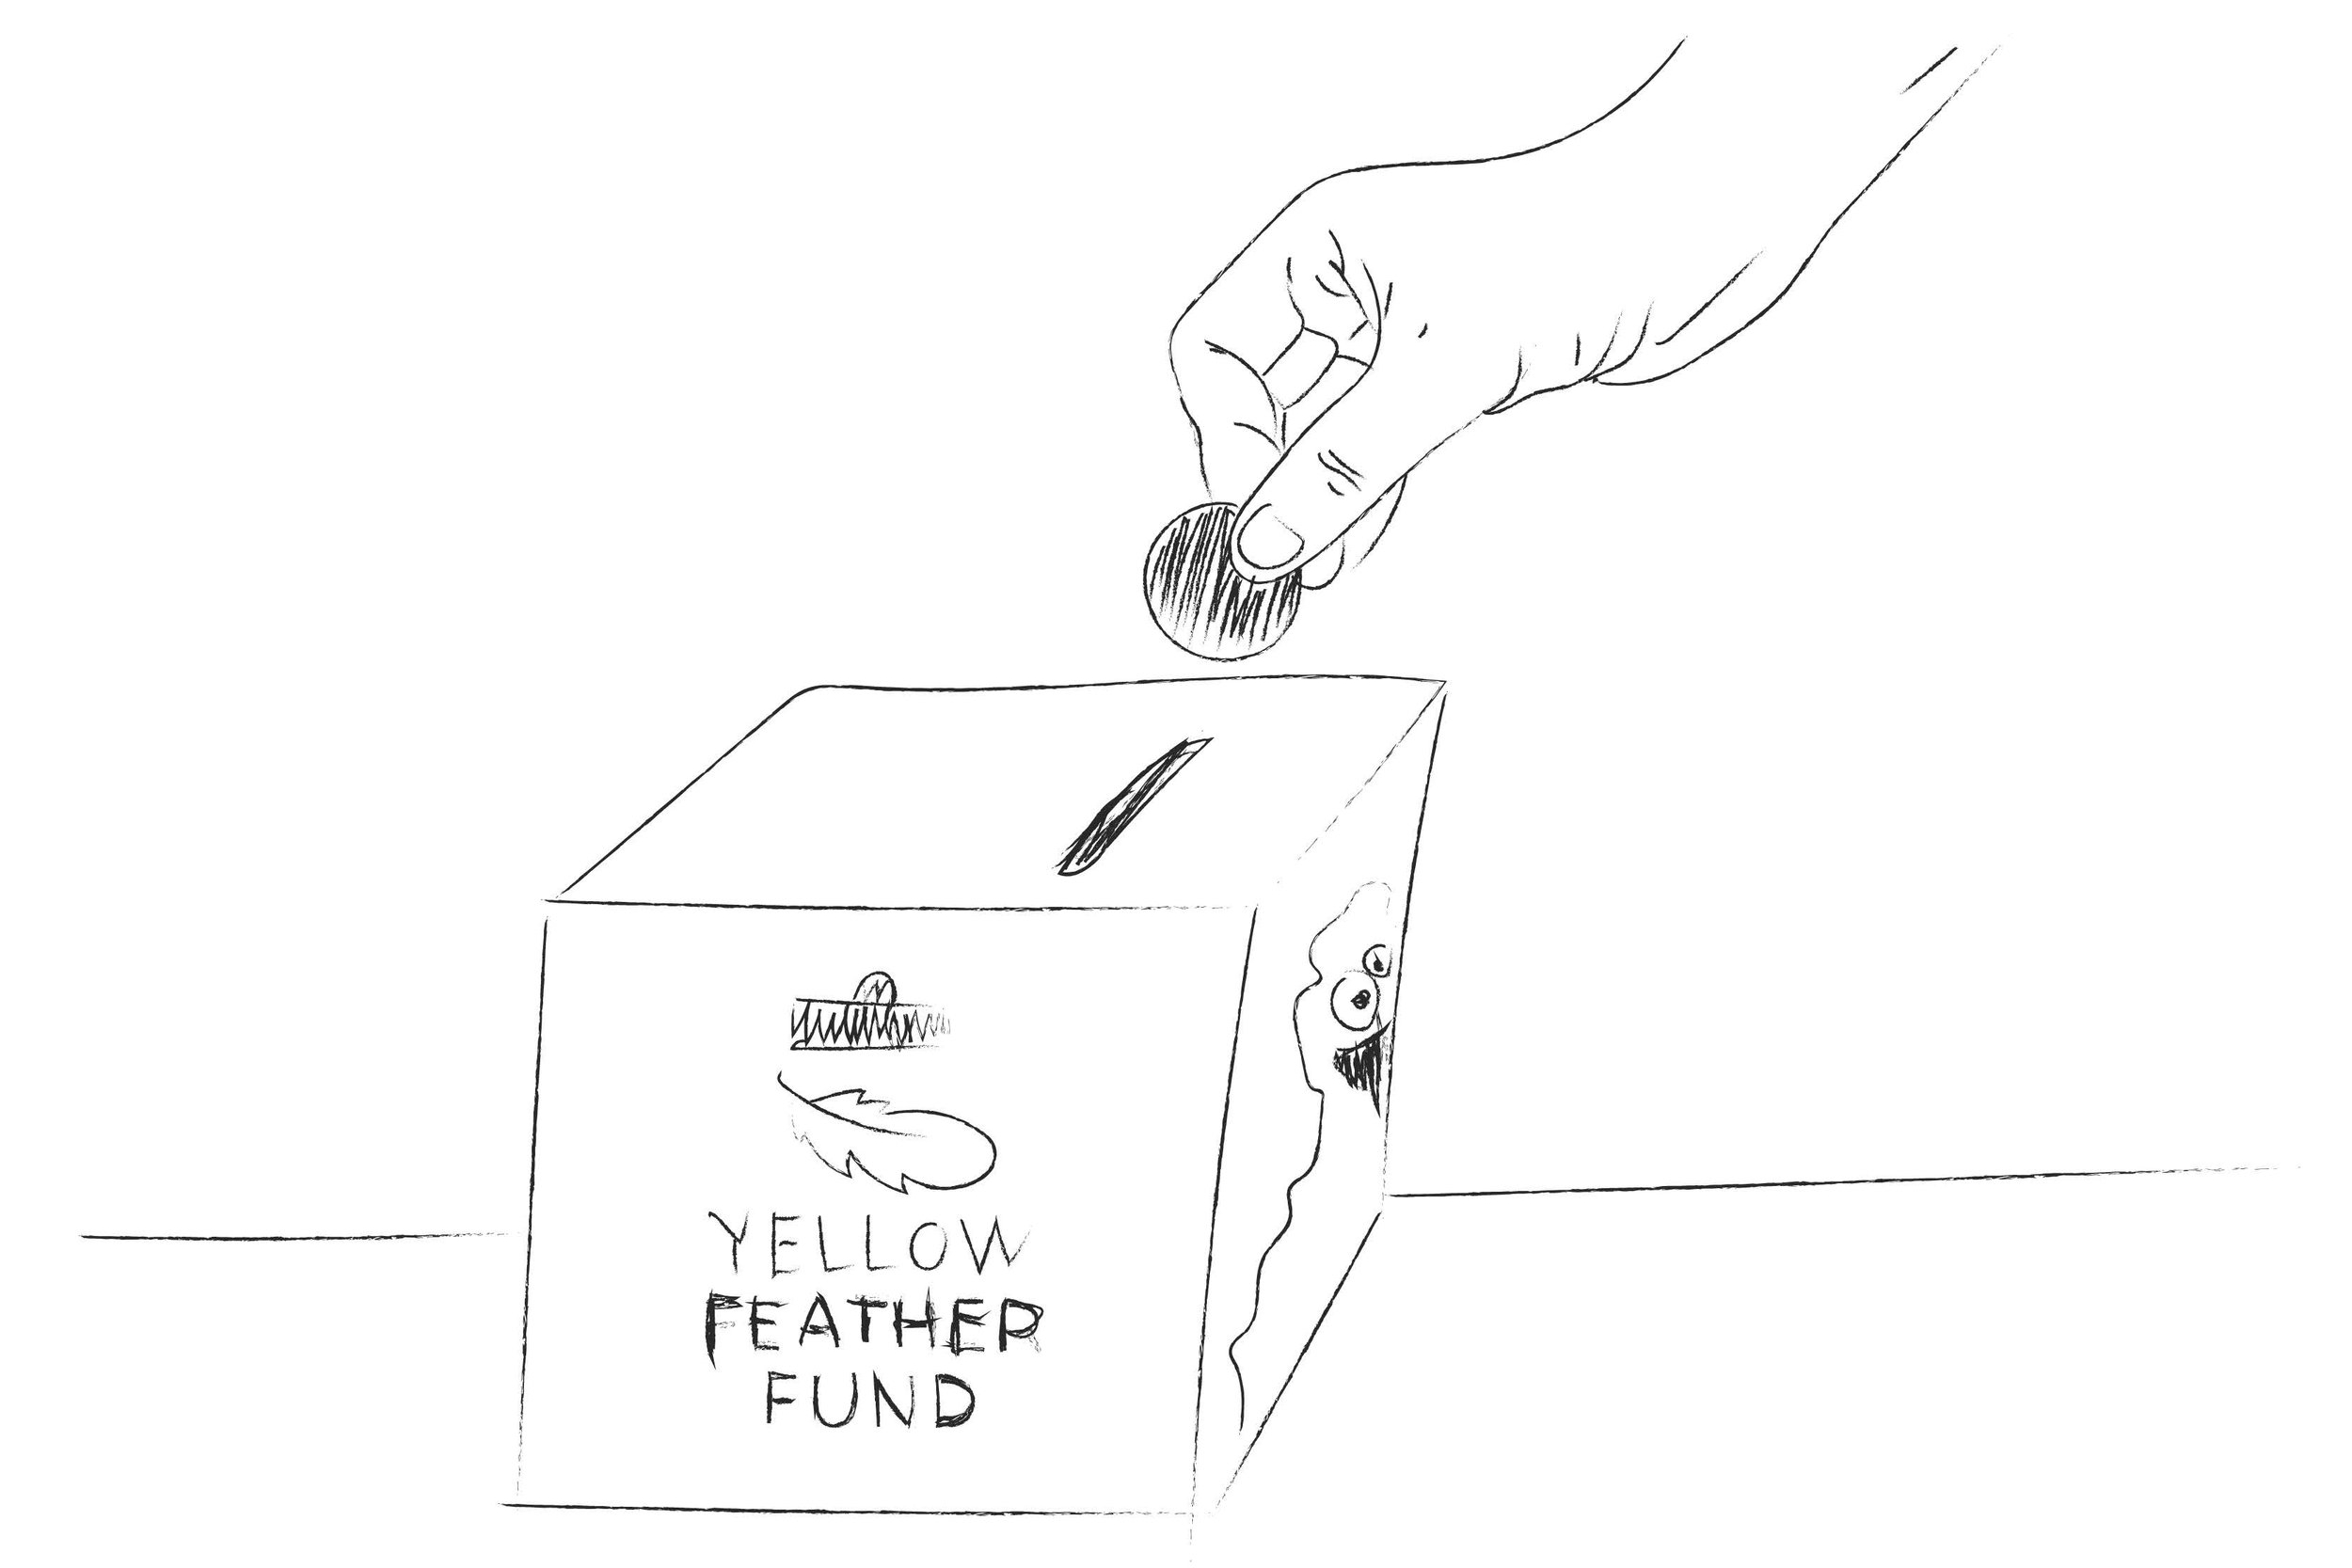 Fund Collection